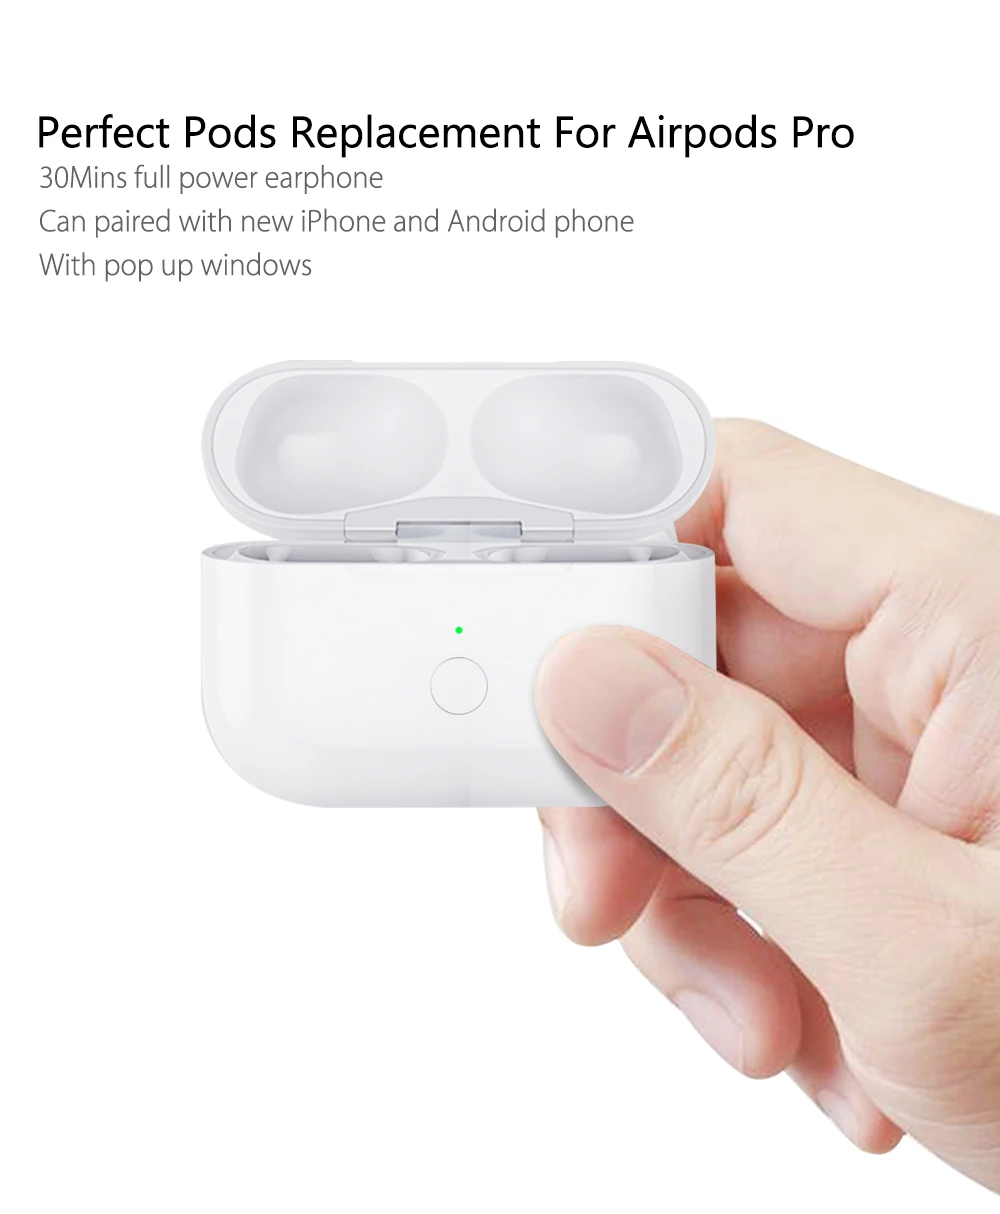 Qi Wireless Charging Case For Airpods Pro Box Case With Pairing Pop up  Windows Earphone Charger Accessories Box For Air pods Pro